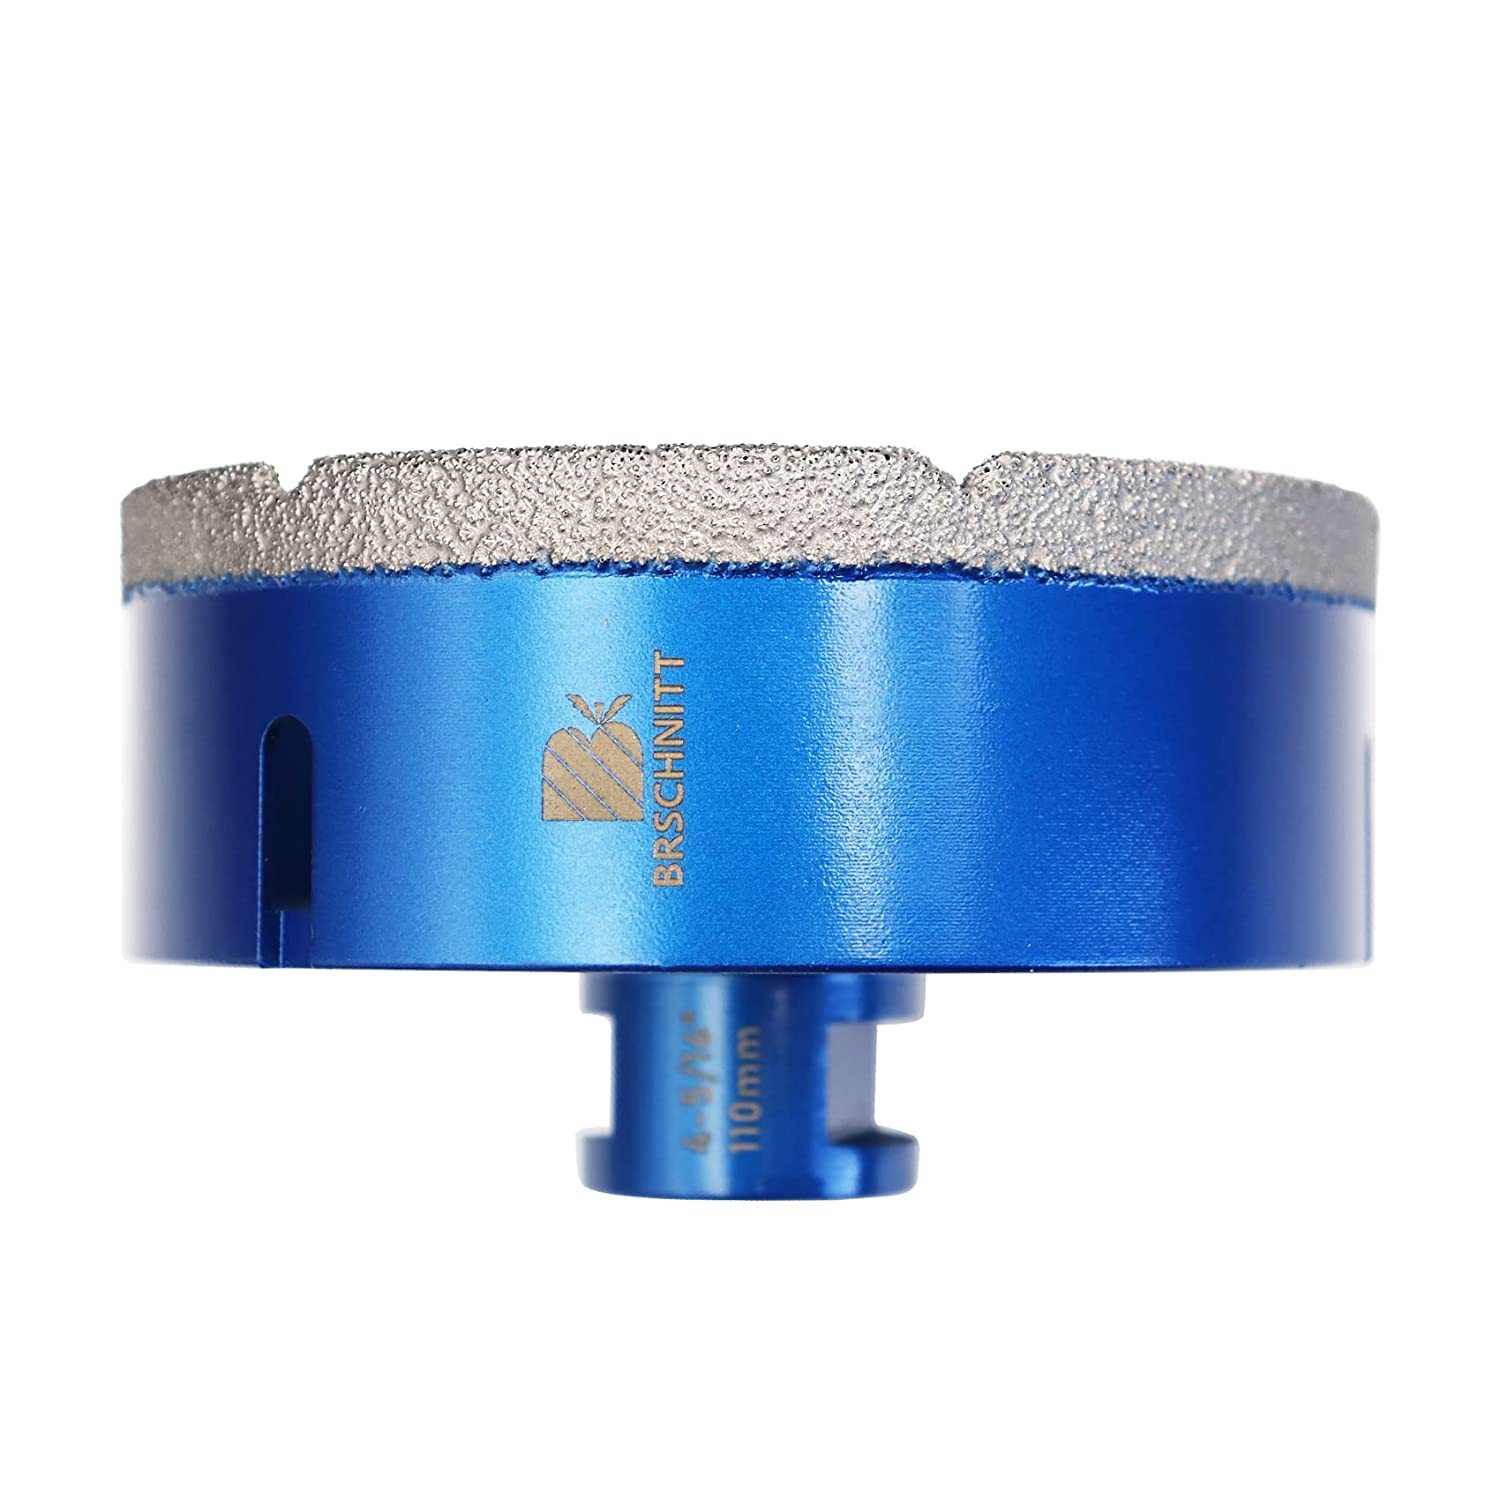 Primary image for 110Mm Diamond Core Drill Bit For Drilling Porcelain Tile, Ceramic, Marble, And